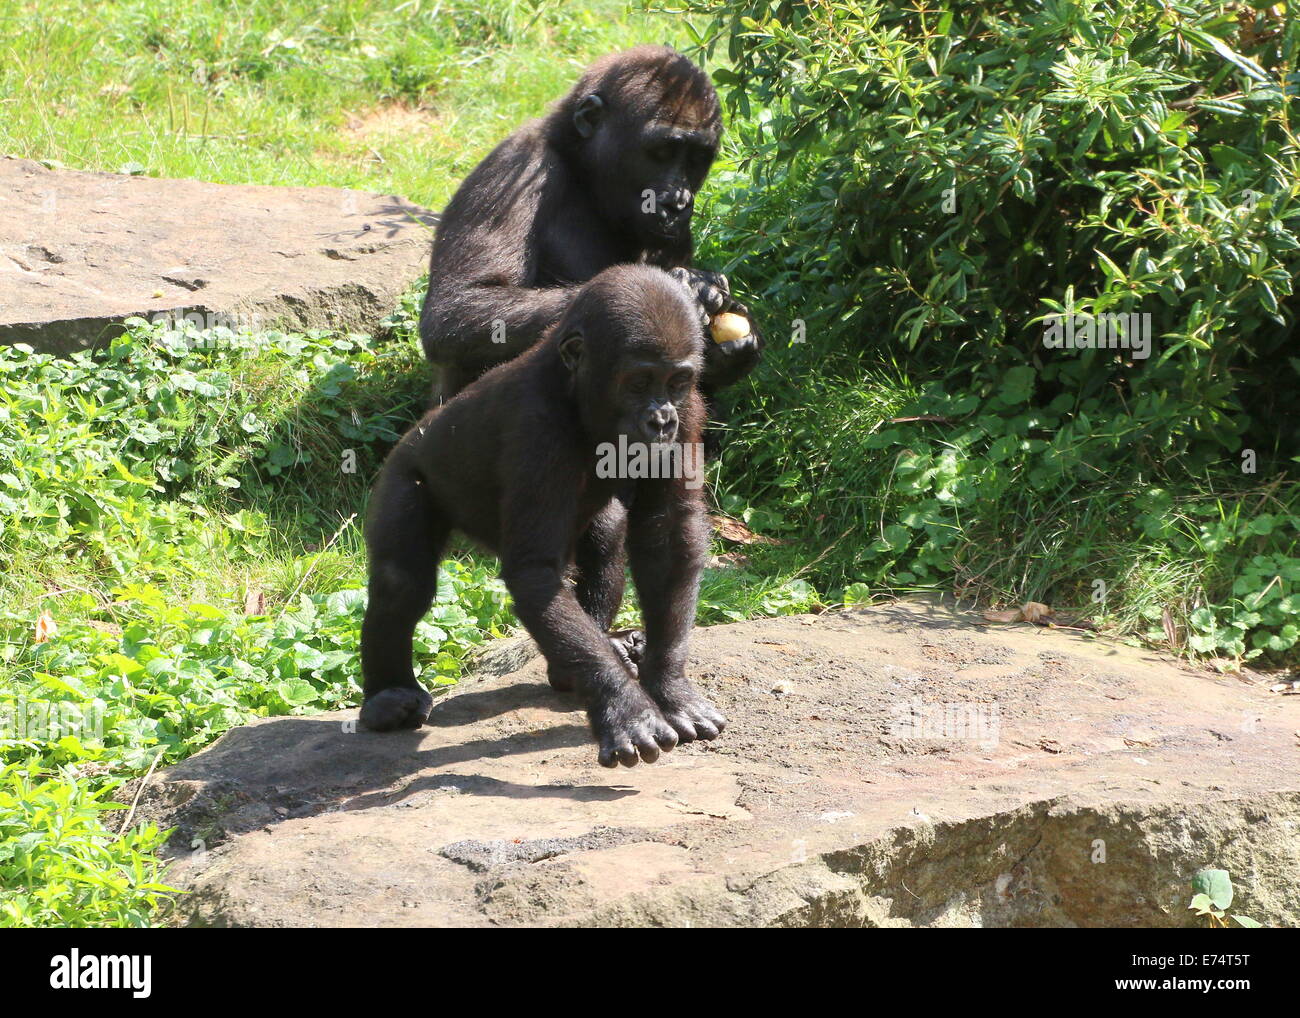 Two young male gorillas exploring and eating Stock Photo